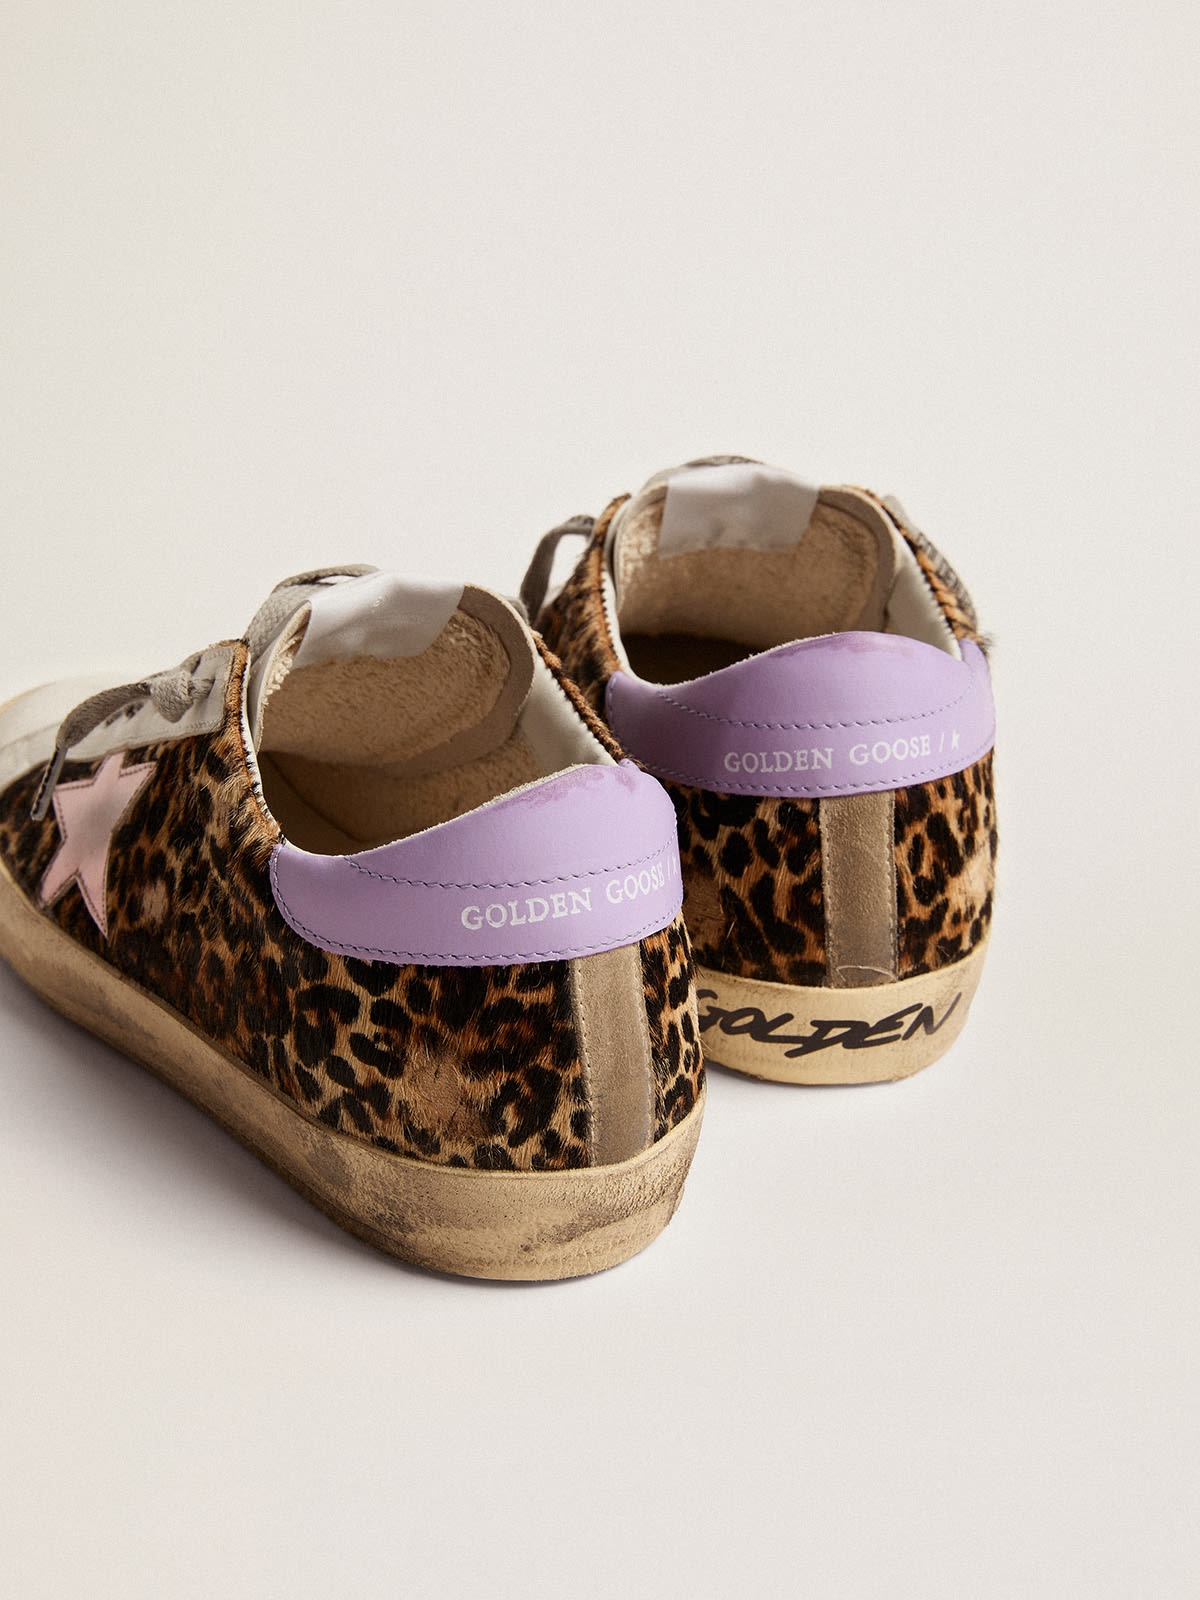 Super-Star LTD sneakers in leopard-print pony skin with salmon-colored laminated leather star and pu - 5